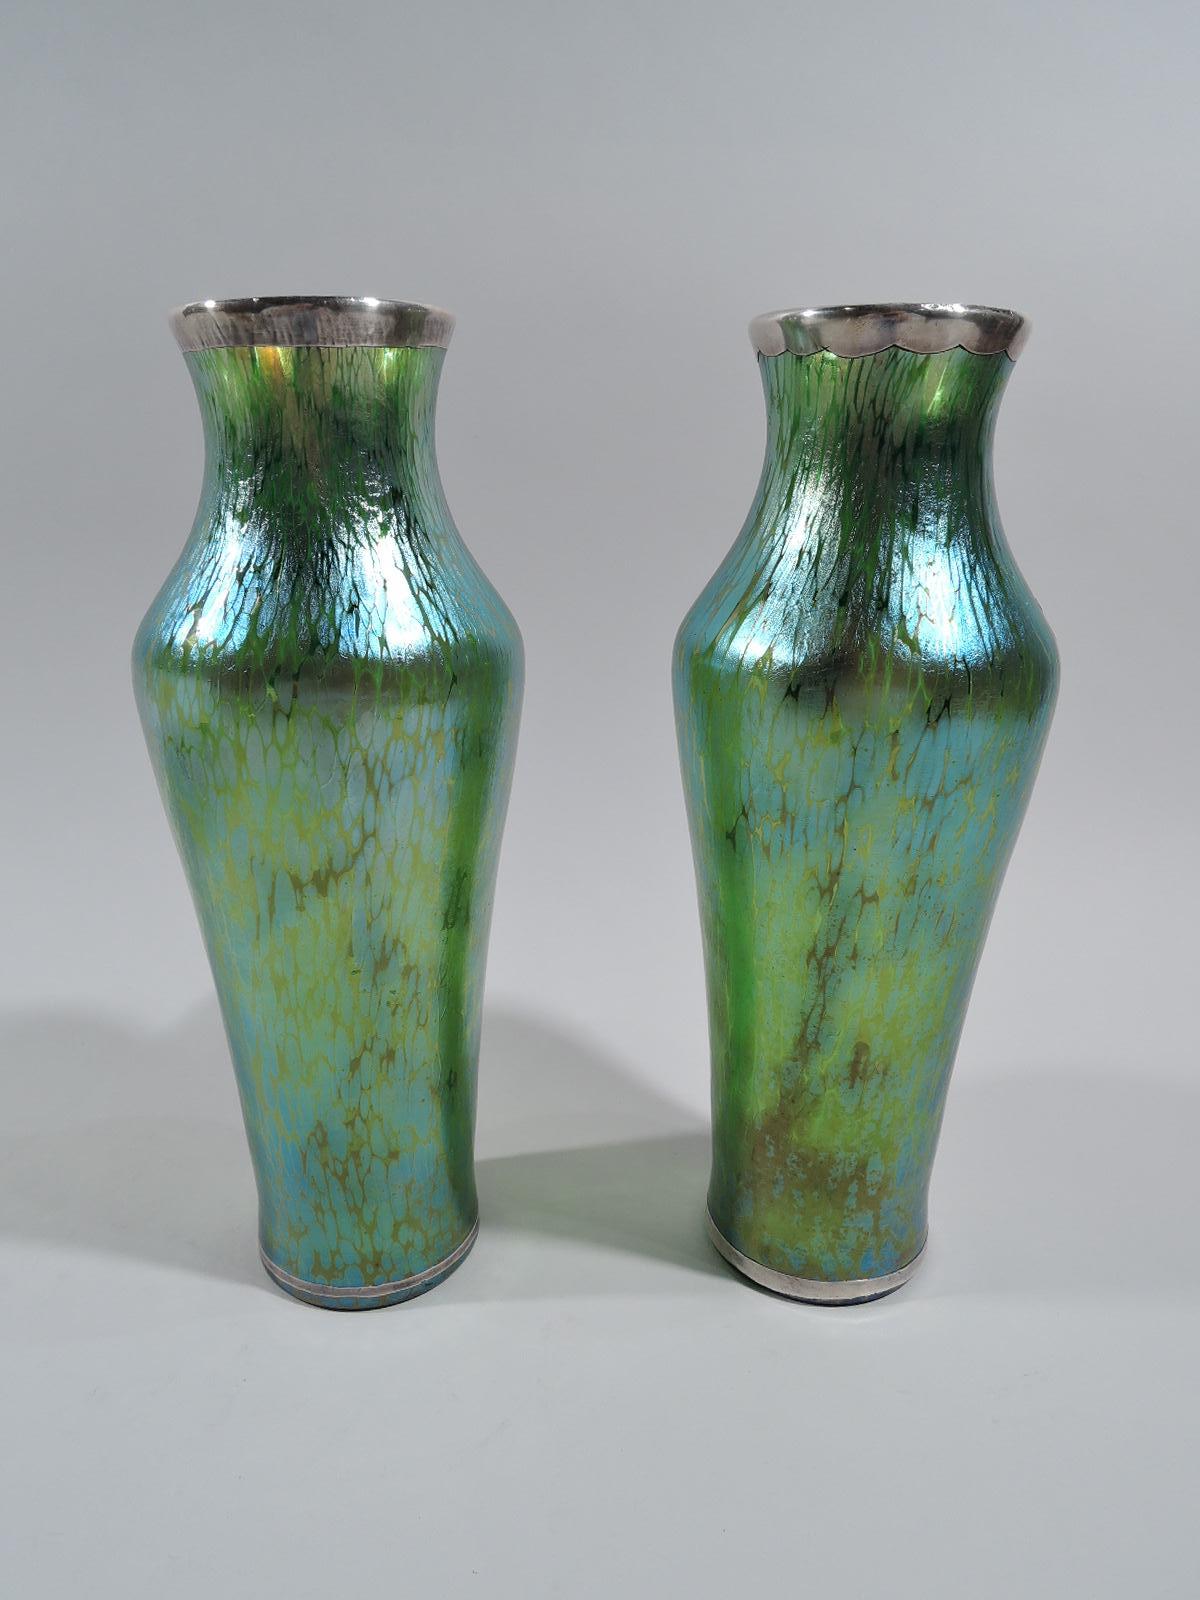 Pair of turn-of-the-century art glass vases by historic maker Loetz. Each: Slender with tapering sides and inset neck with flared mouth. Glass iridescent green with oil-style fracture pattern. On front is engraved silver overlay in form of